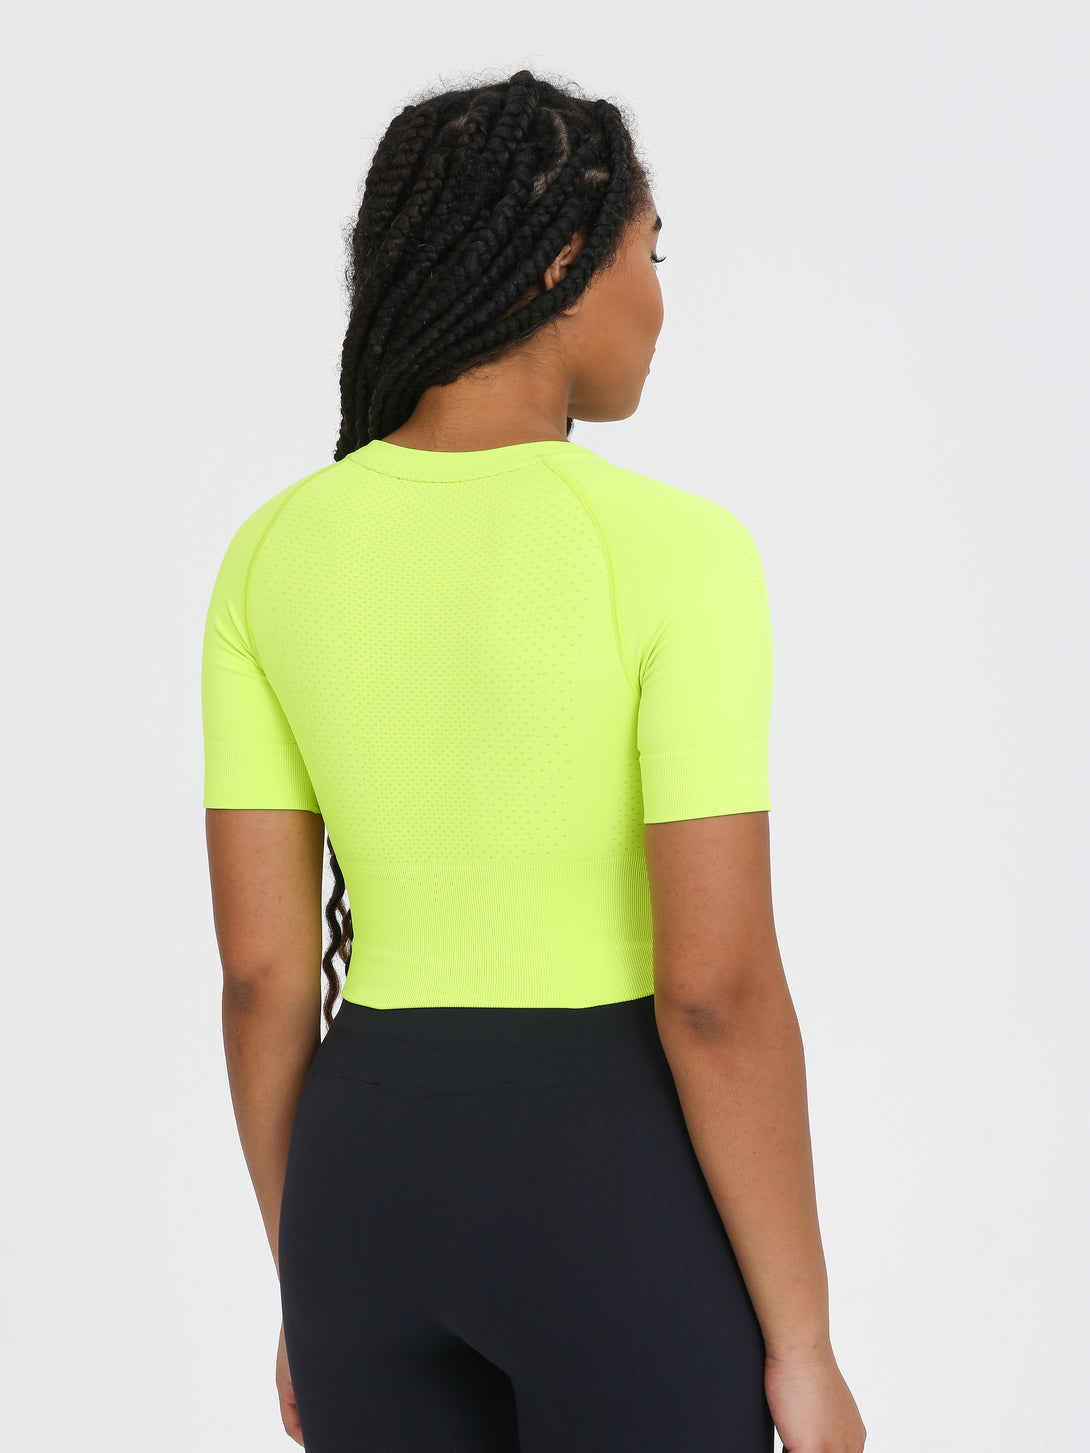 A Woman Wearing Lime Color The Main Short Sleeve Crop Top